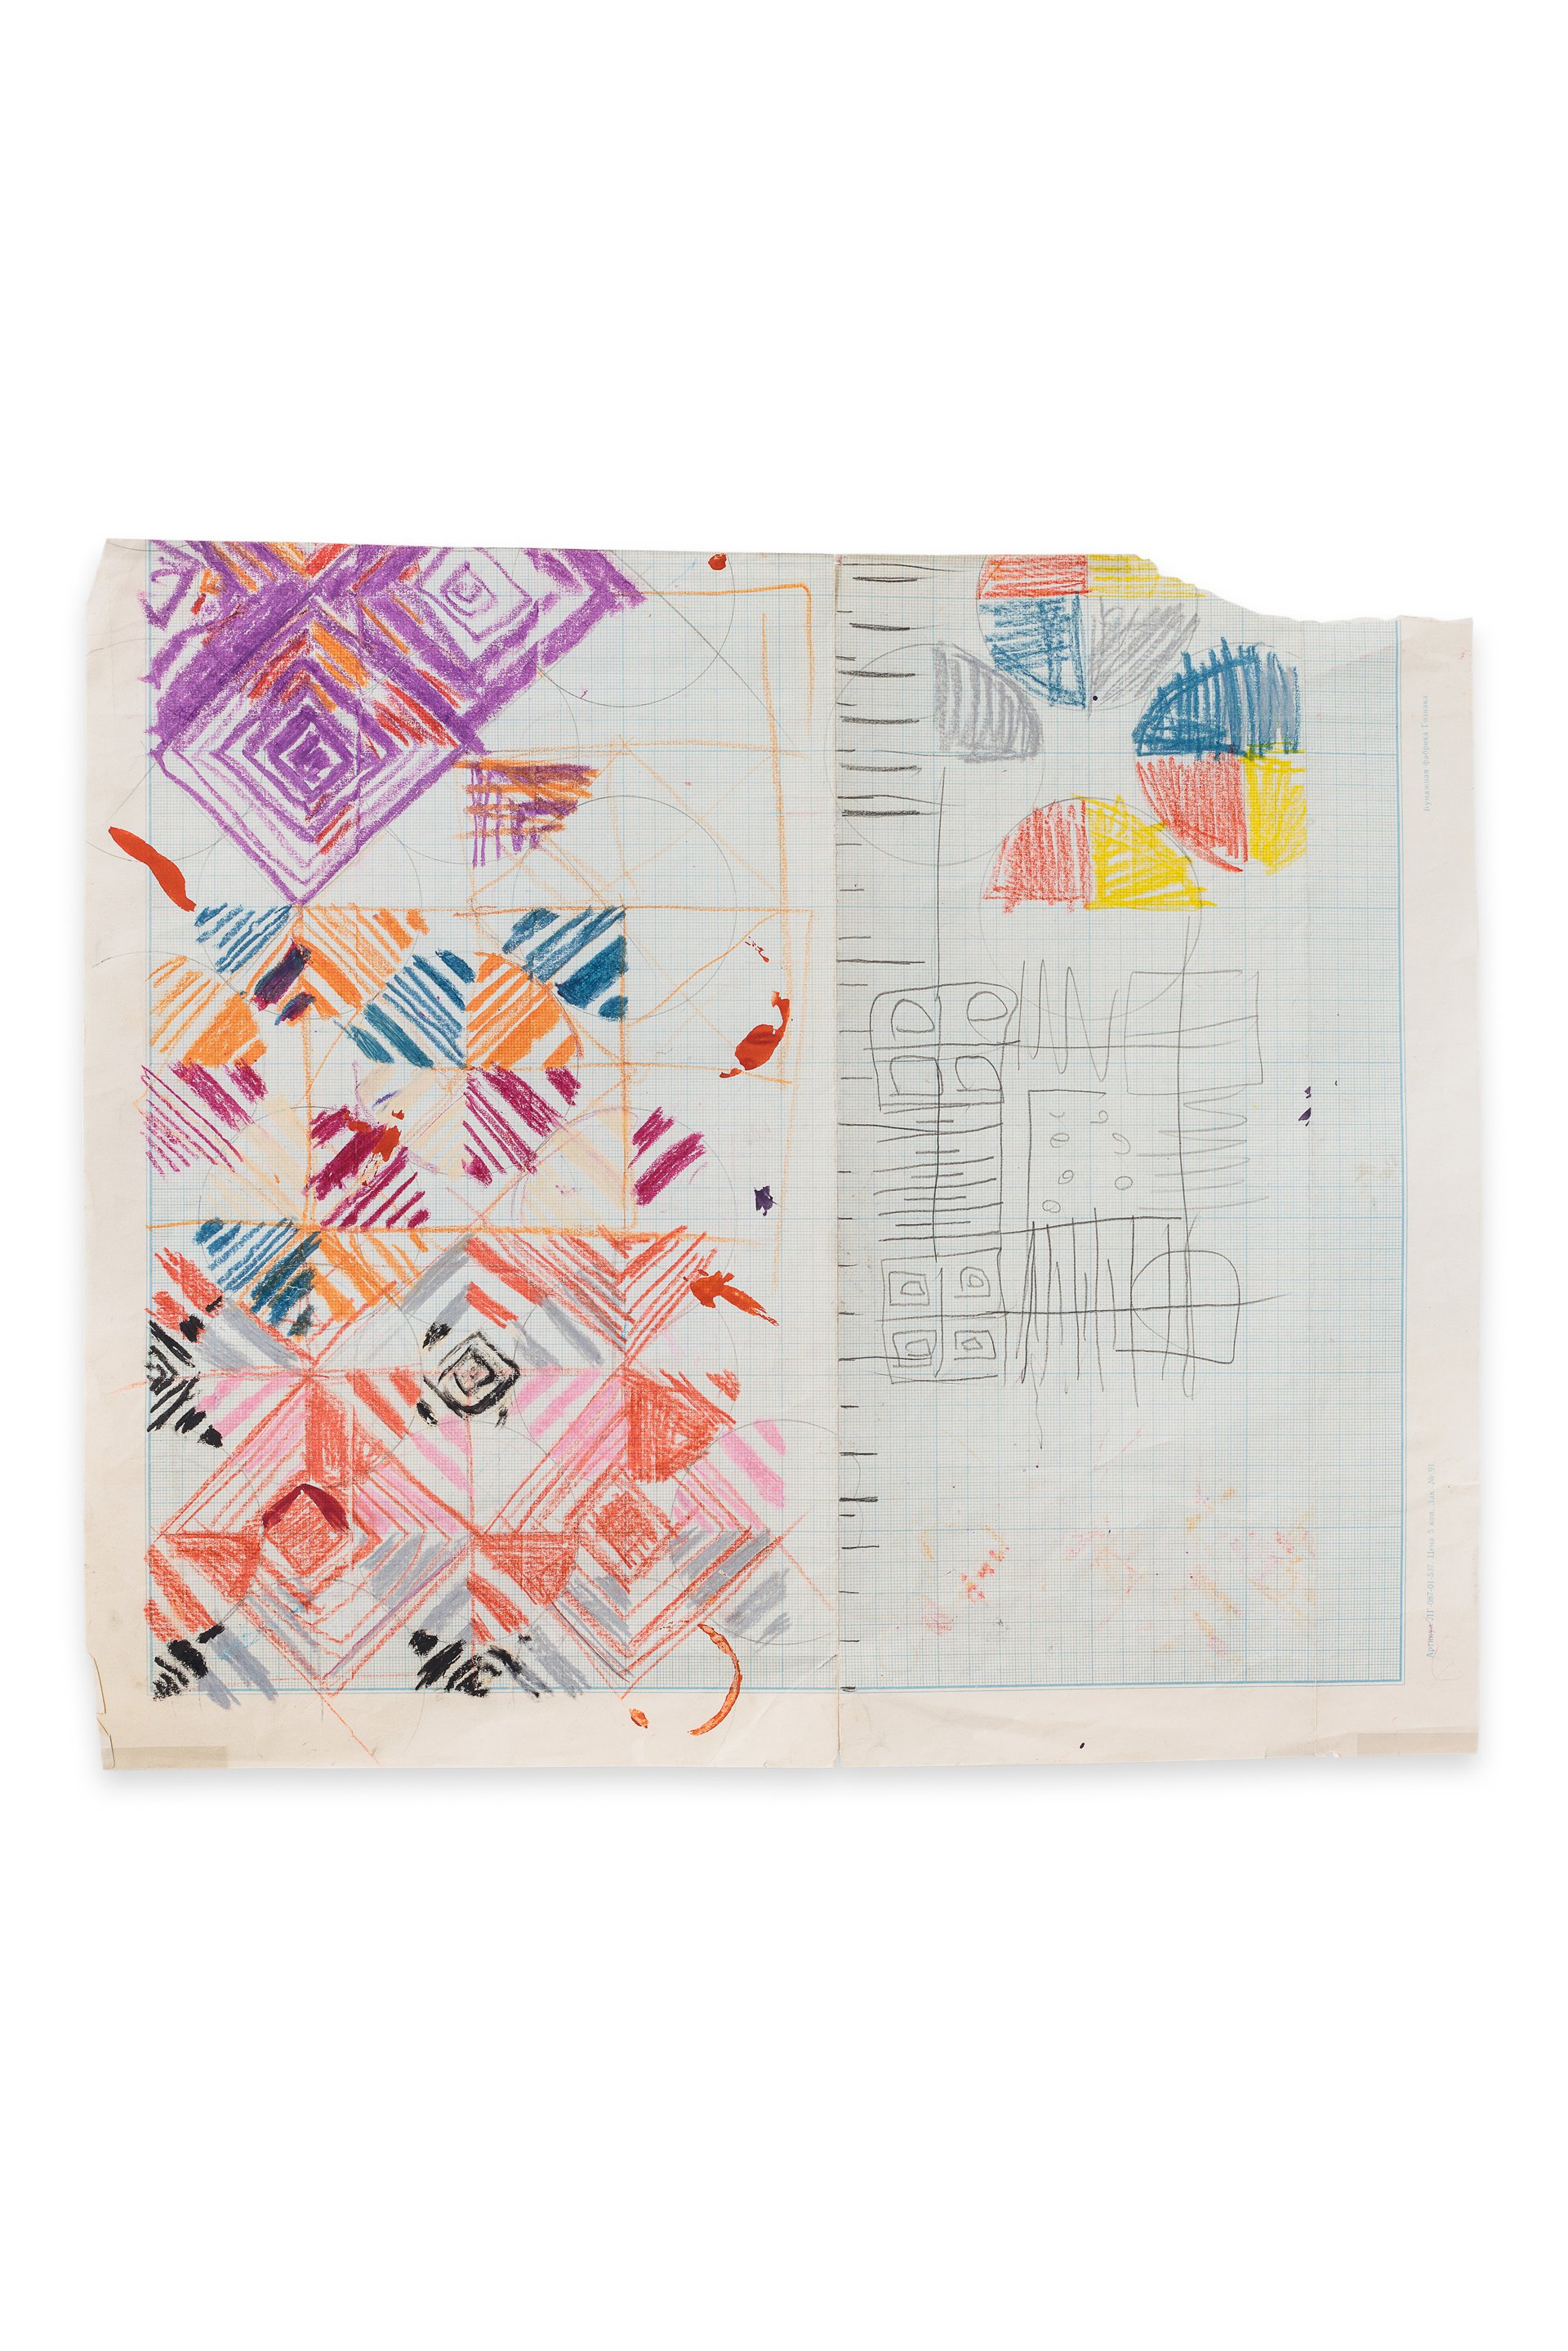 Anna AndreevaSketch for &quot;Exercises with Circles and Rhombus&quot;, 1968-69Gouache and crayon on graph paper45 x 39.5 cm